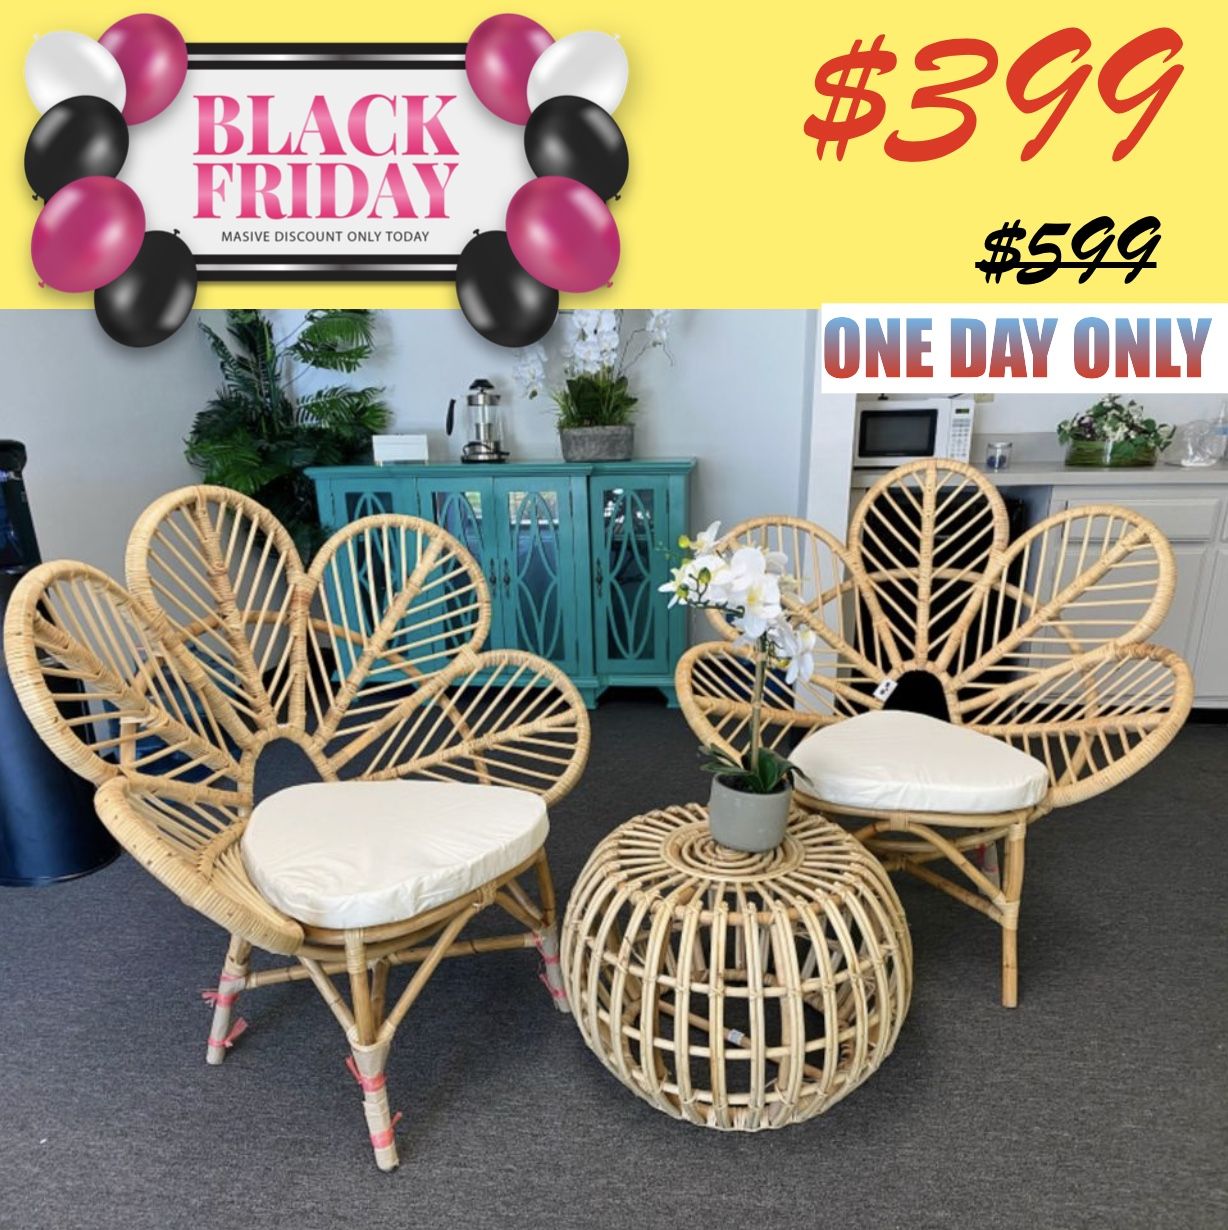 BLACK FRIDAY ONLY $399: 3-Piece Patio Set with 1 Rattan Table and 2 Cushioned Chairs